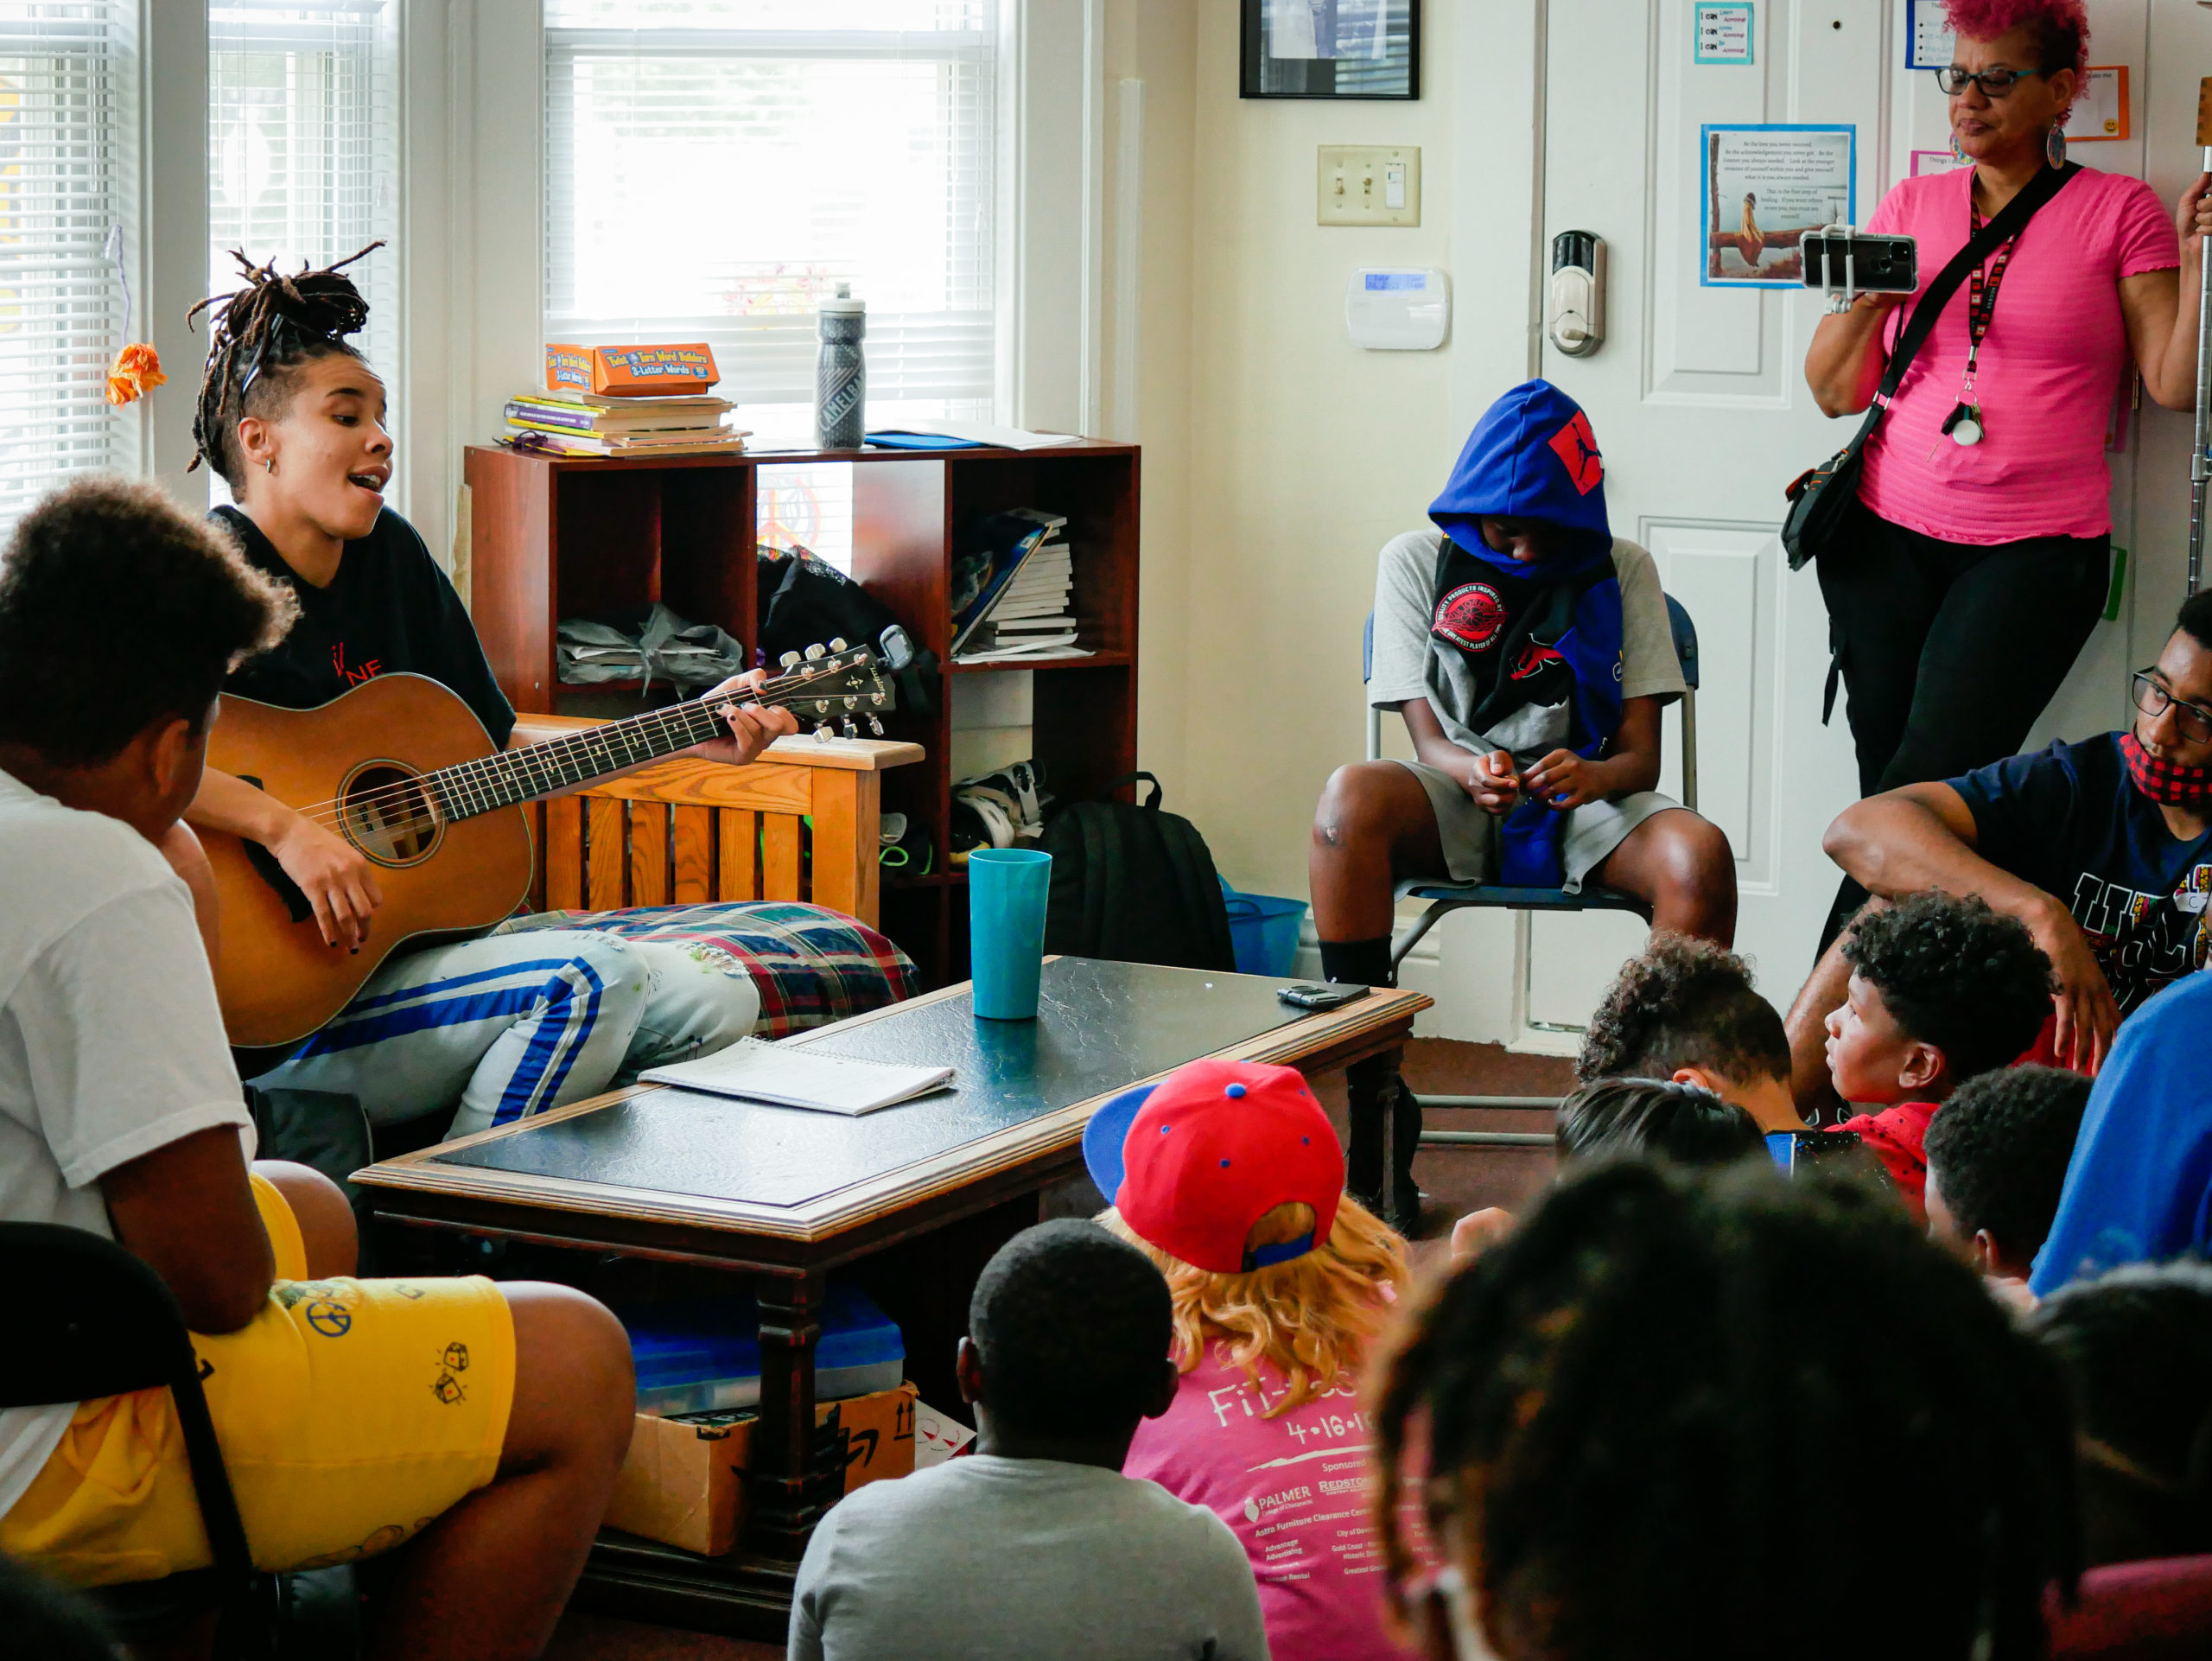 Juno performs for children in the Project Renewal and River Music Experience collaborative project.